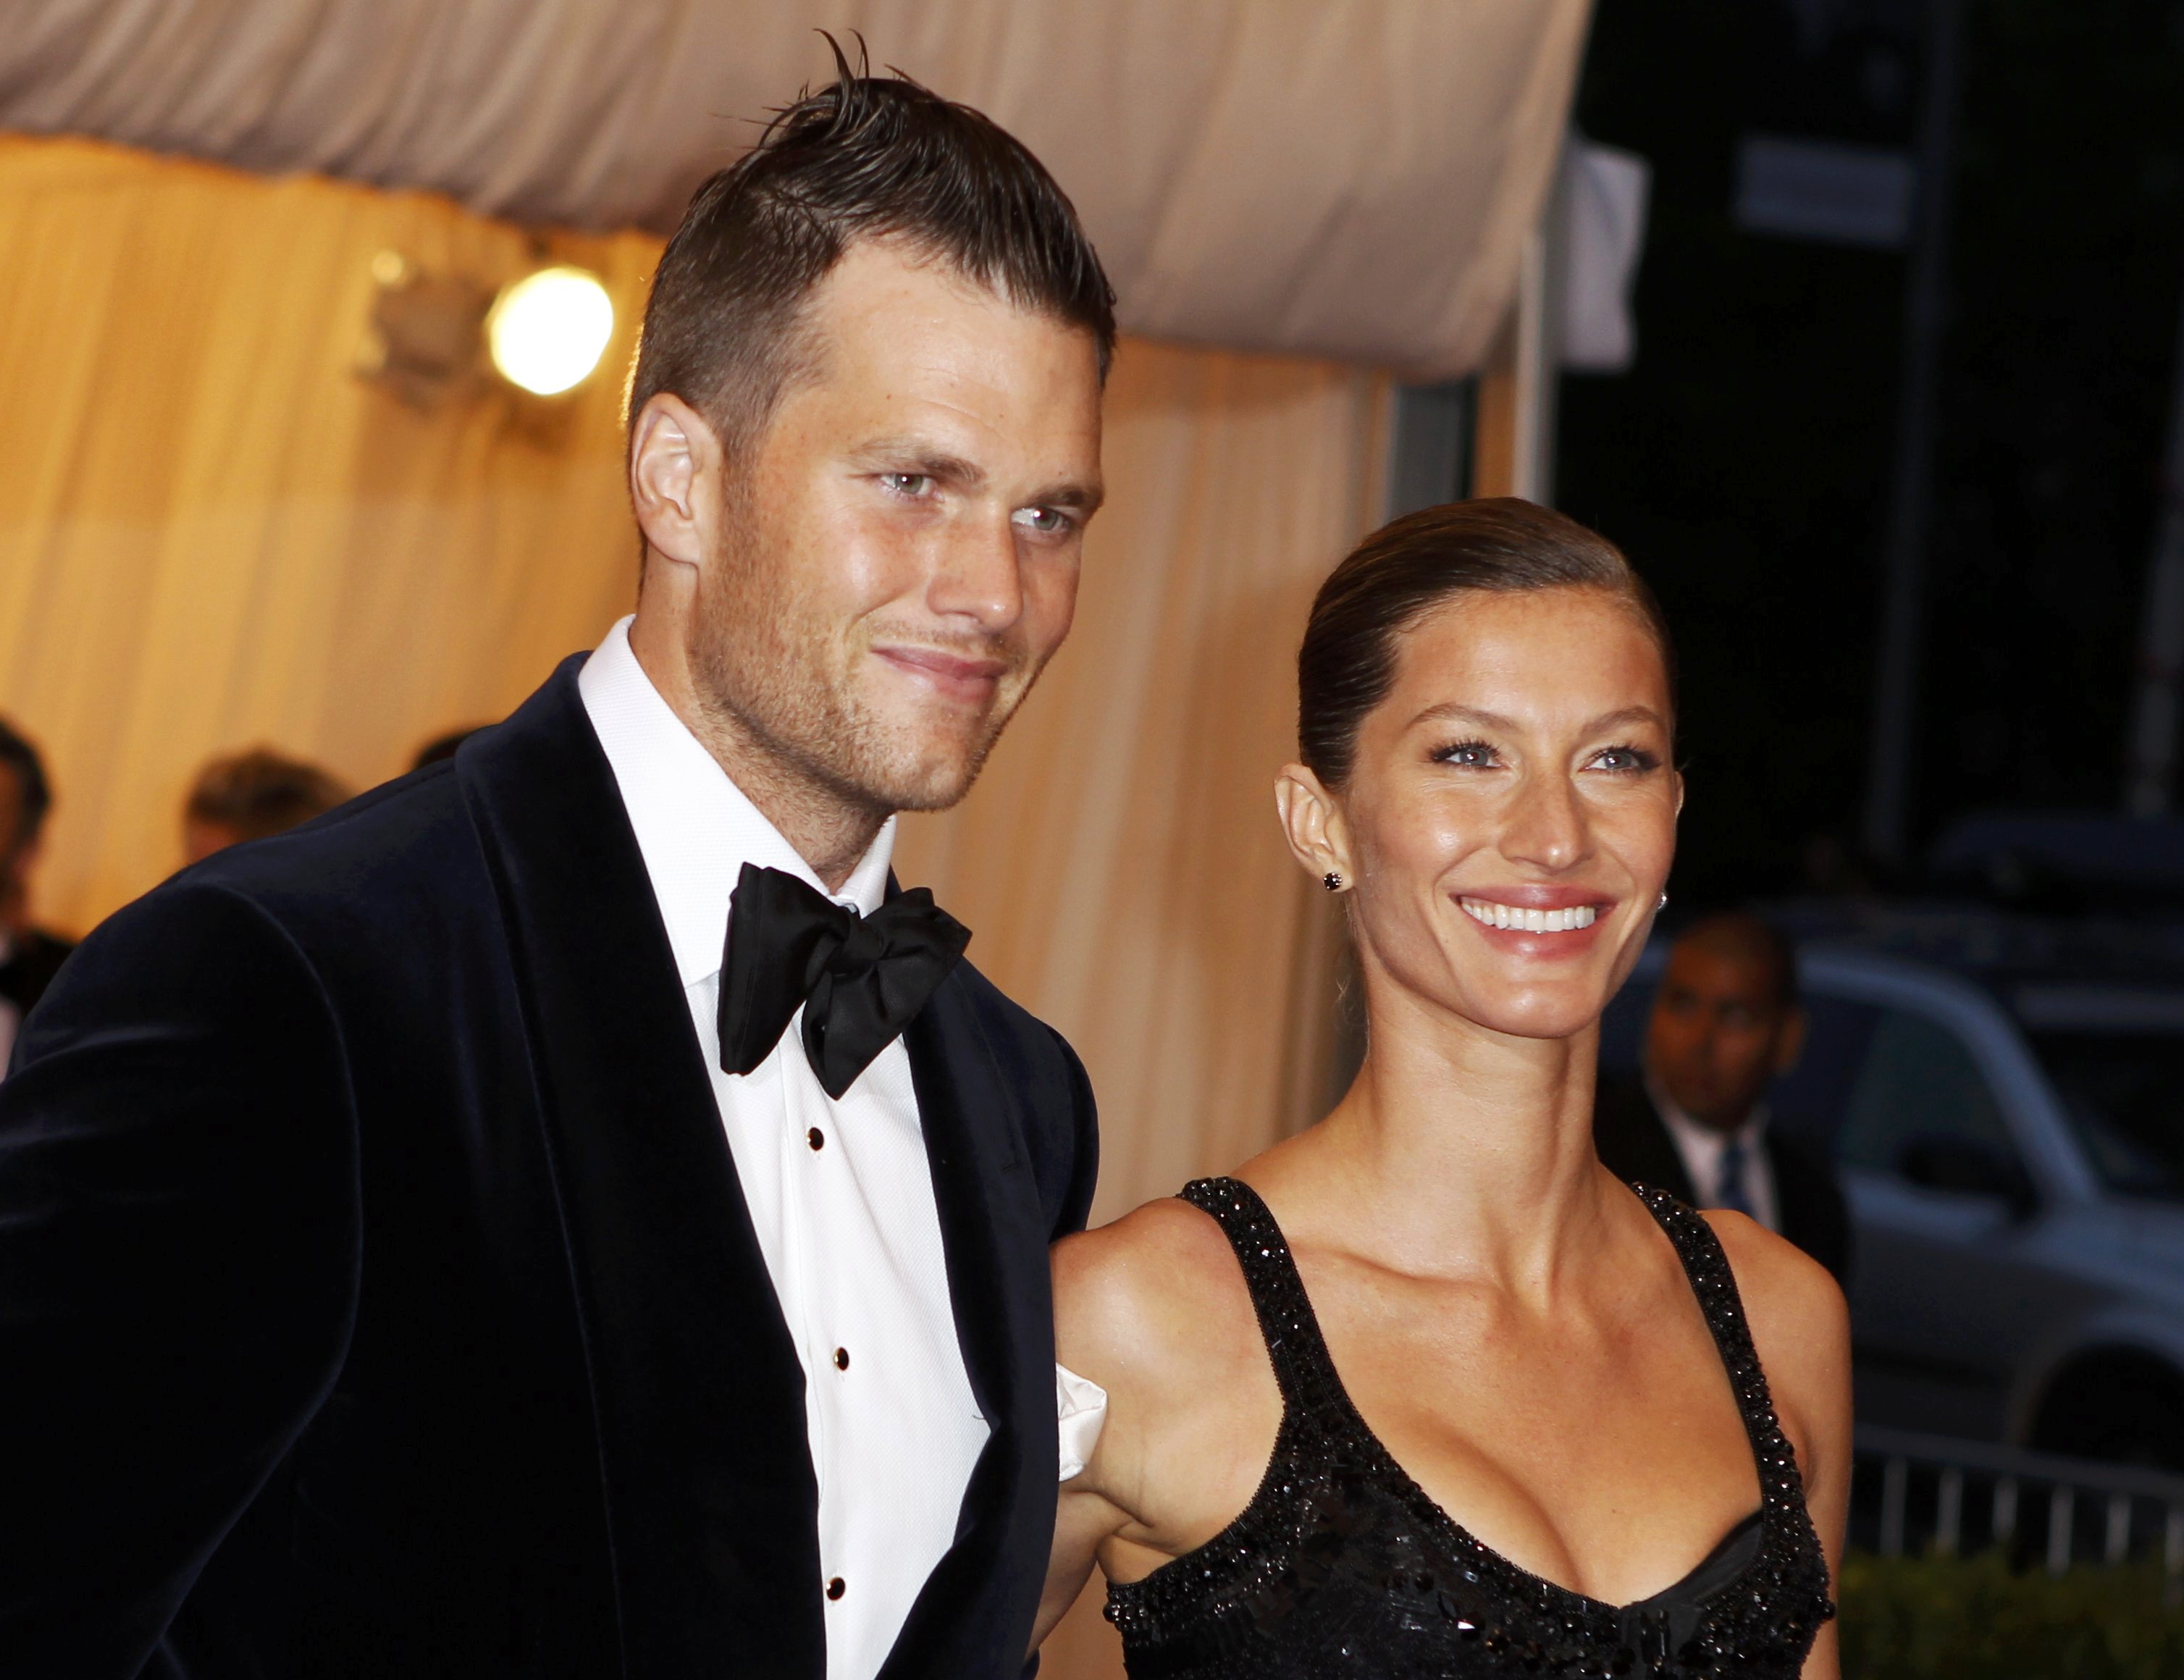 Gisele Bundchen and Tom Brady arrive at the Metropolitan Museum of Art Costume Institute Benefit celebrating the opening of "Schiaparelli and Prada: Impossible Conversations" exhibition in New York, May 7, 2012.   REUTERS/Lucas Jackson (UNITED STATES  - Tags: ENTERTAINMENT FASHION)